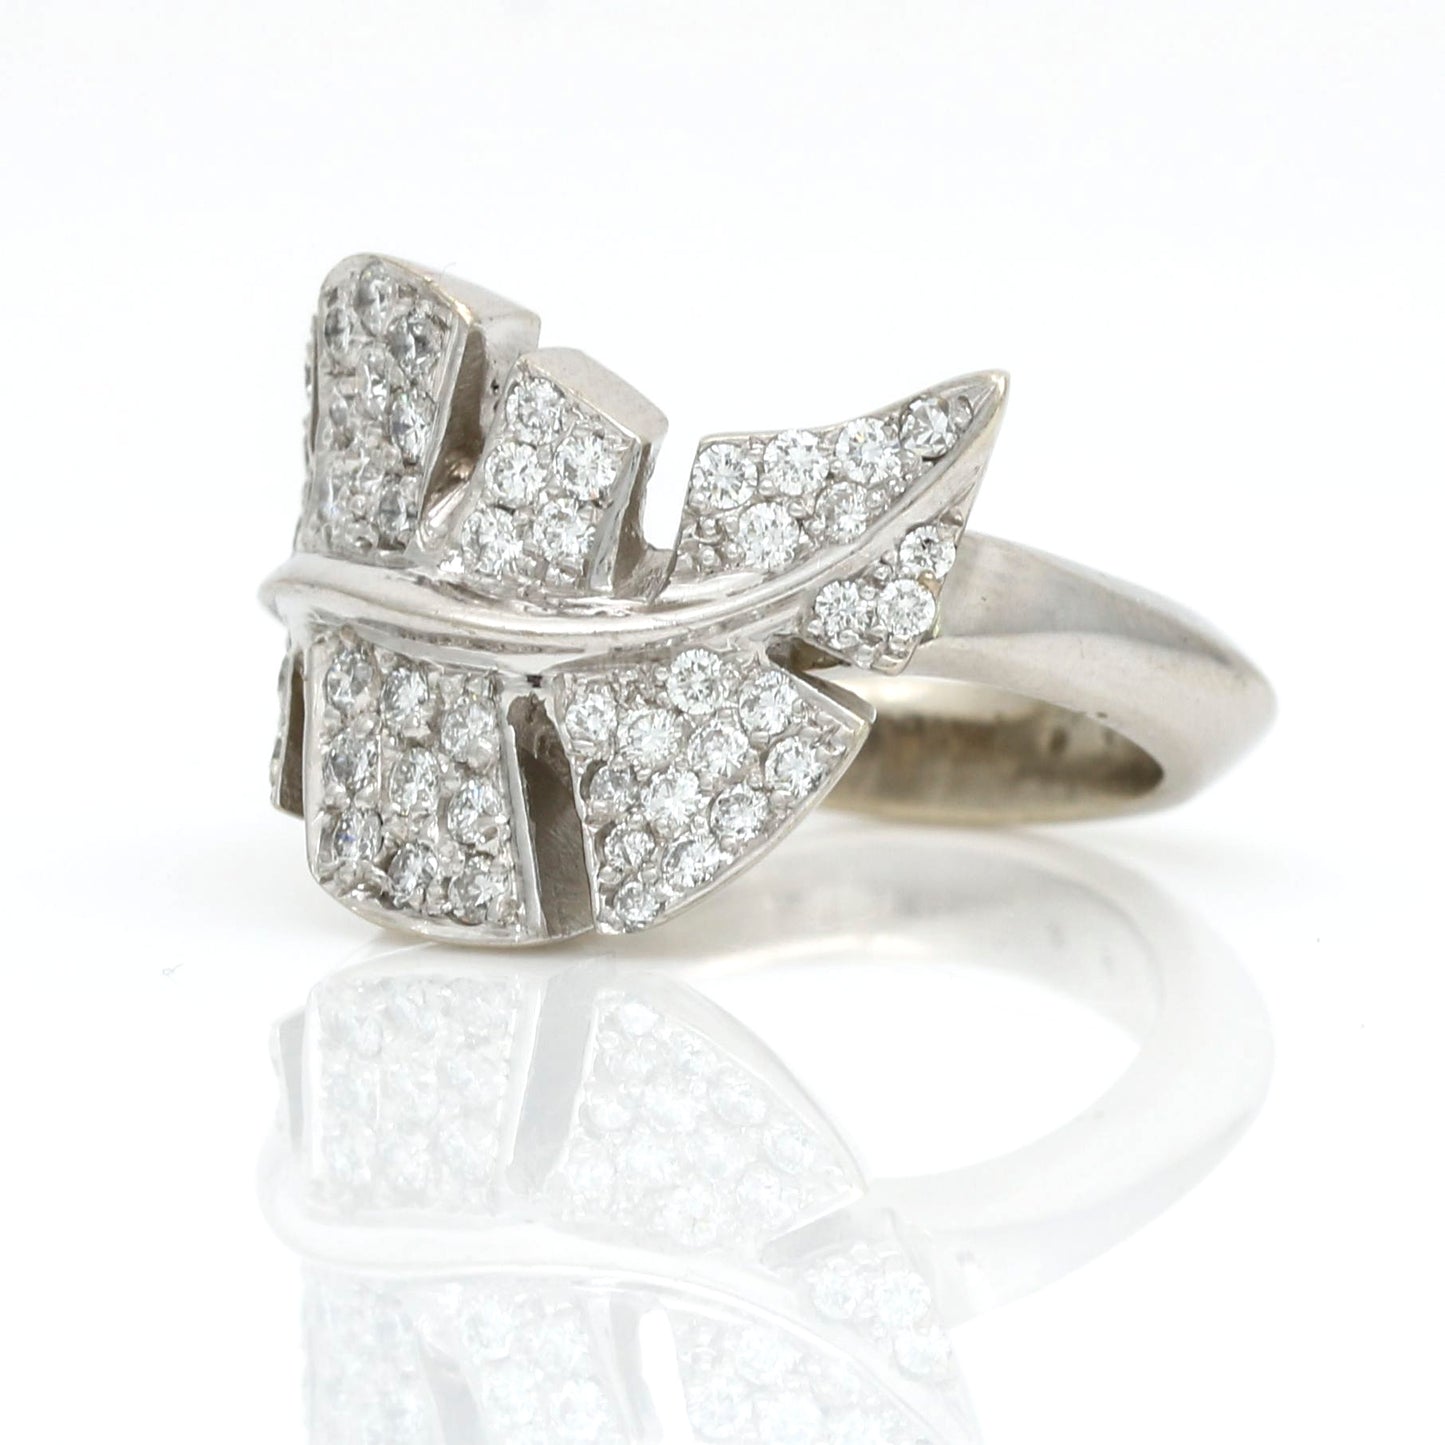 Women's Pave Diamond Leaf Statement Ring in 18k White Gold